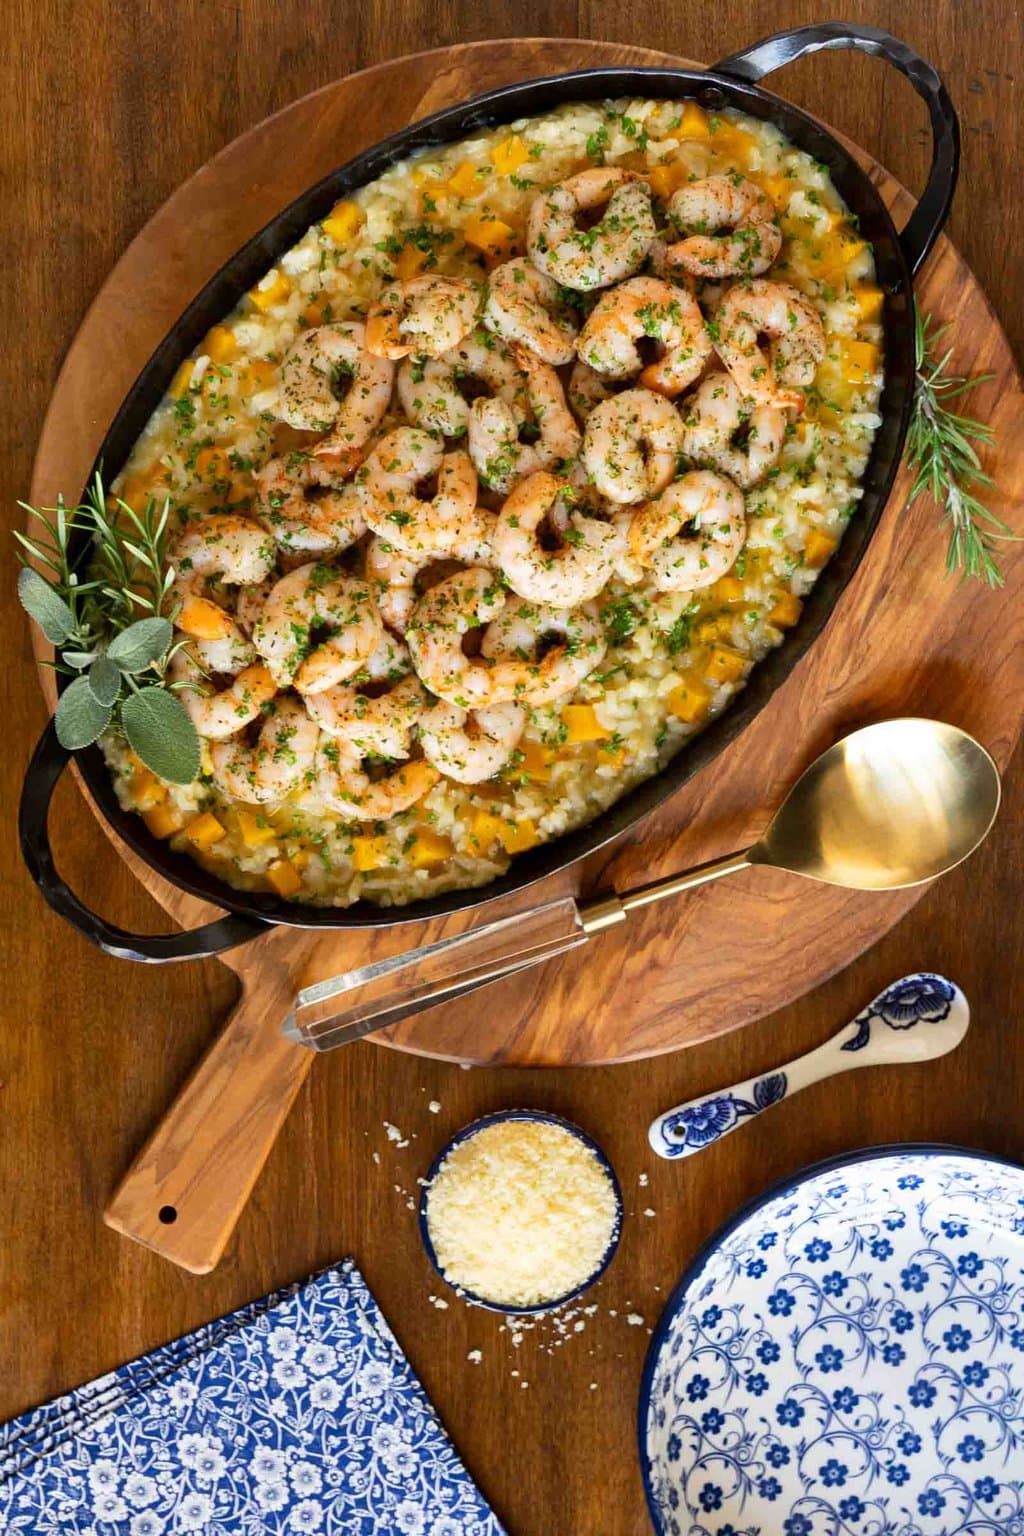 Vertical overhead photo of a hammered steel serving oval dish filled with Butternut Squash Risotto with Italian Roasted Shrimp on a round wood serving plate.